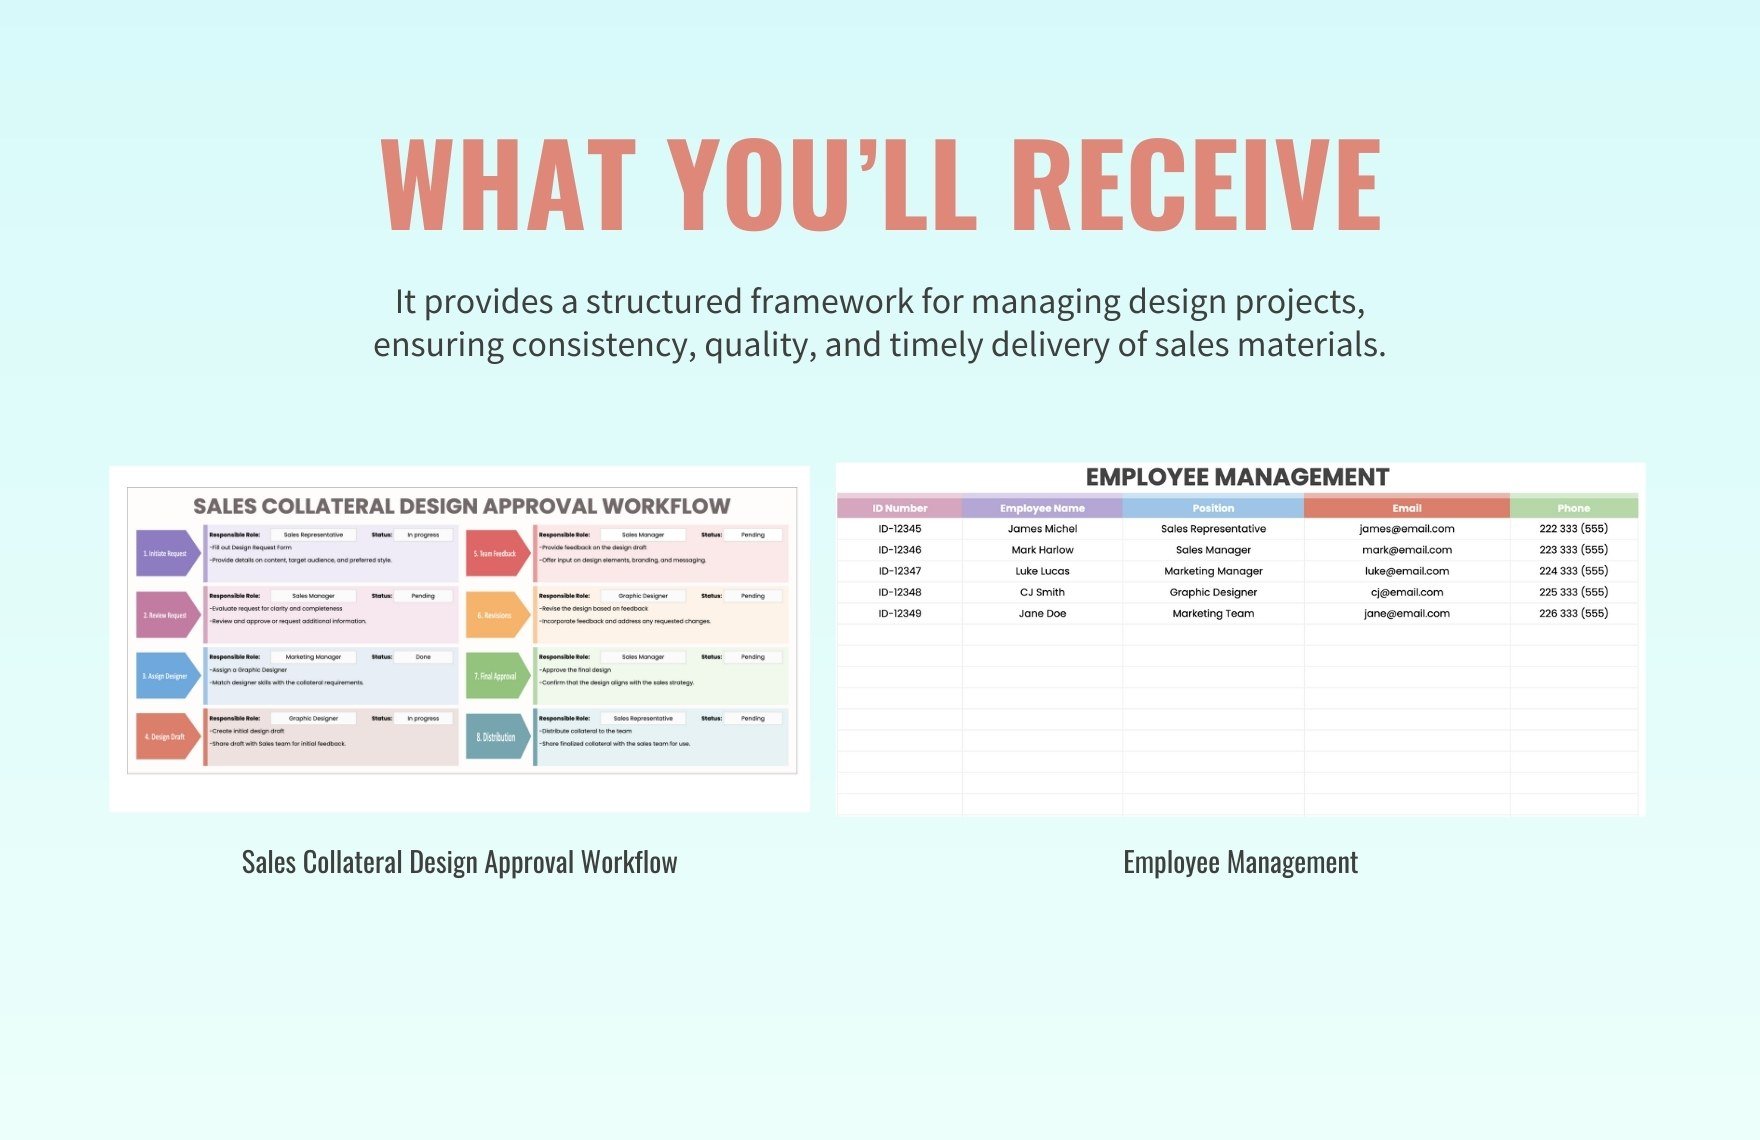 Sales Collateral Design Approval Workflow Template